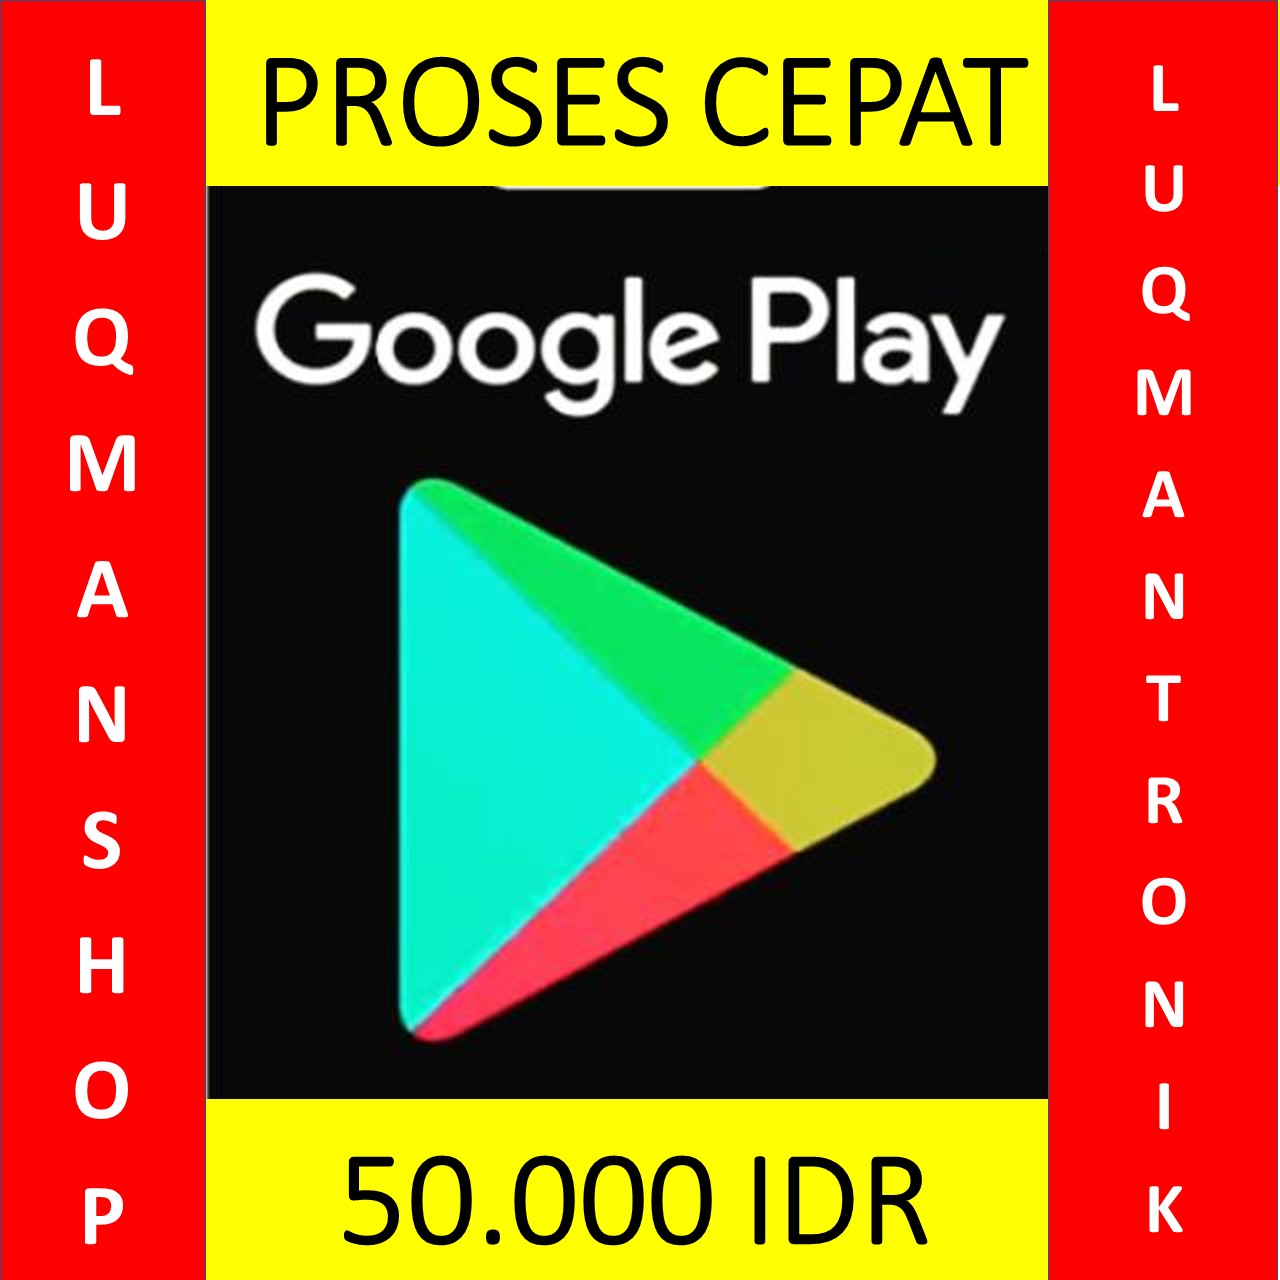 Voucher Game GOOGLE PLAY INDONESIA - Google Play Gift Card Indonesia Rp. 50.000